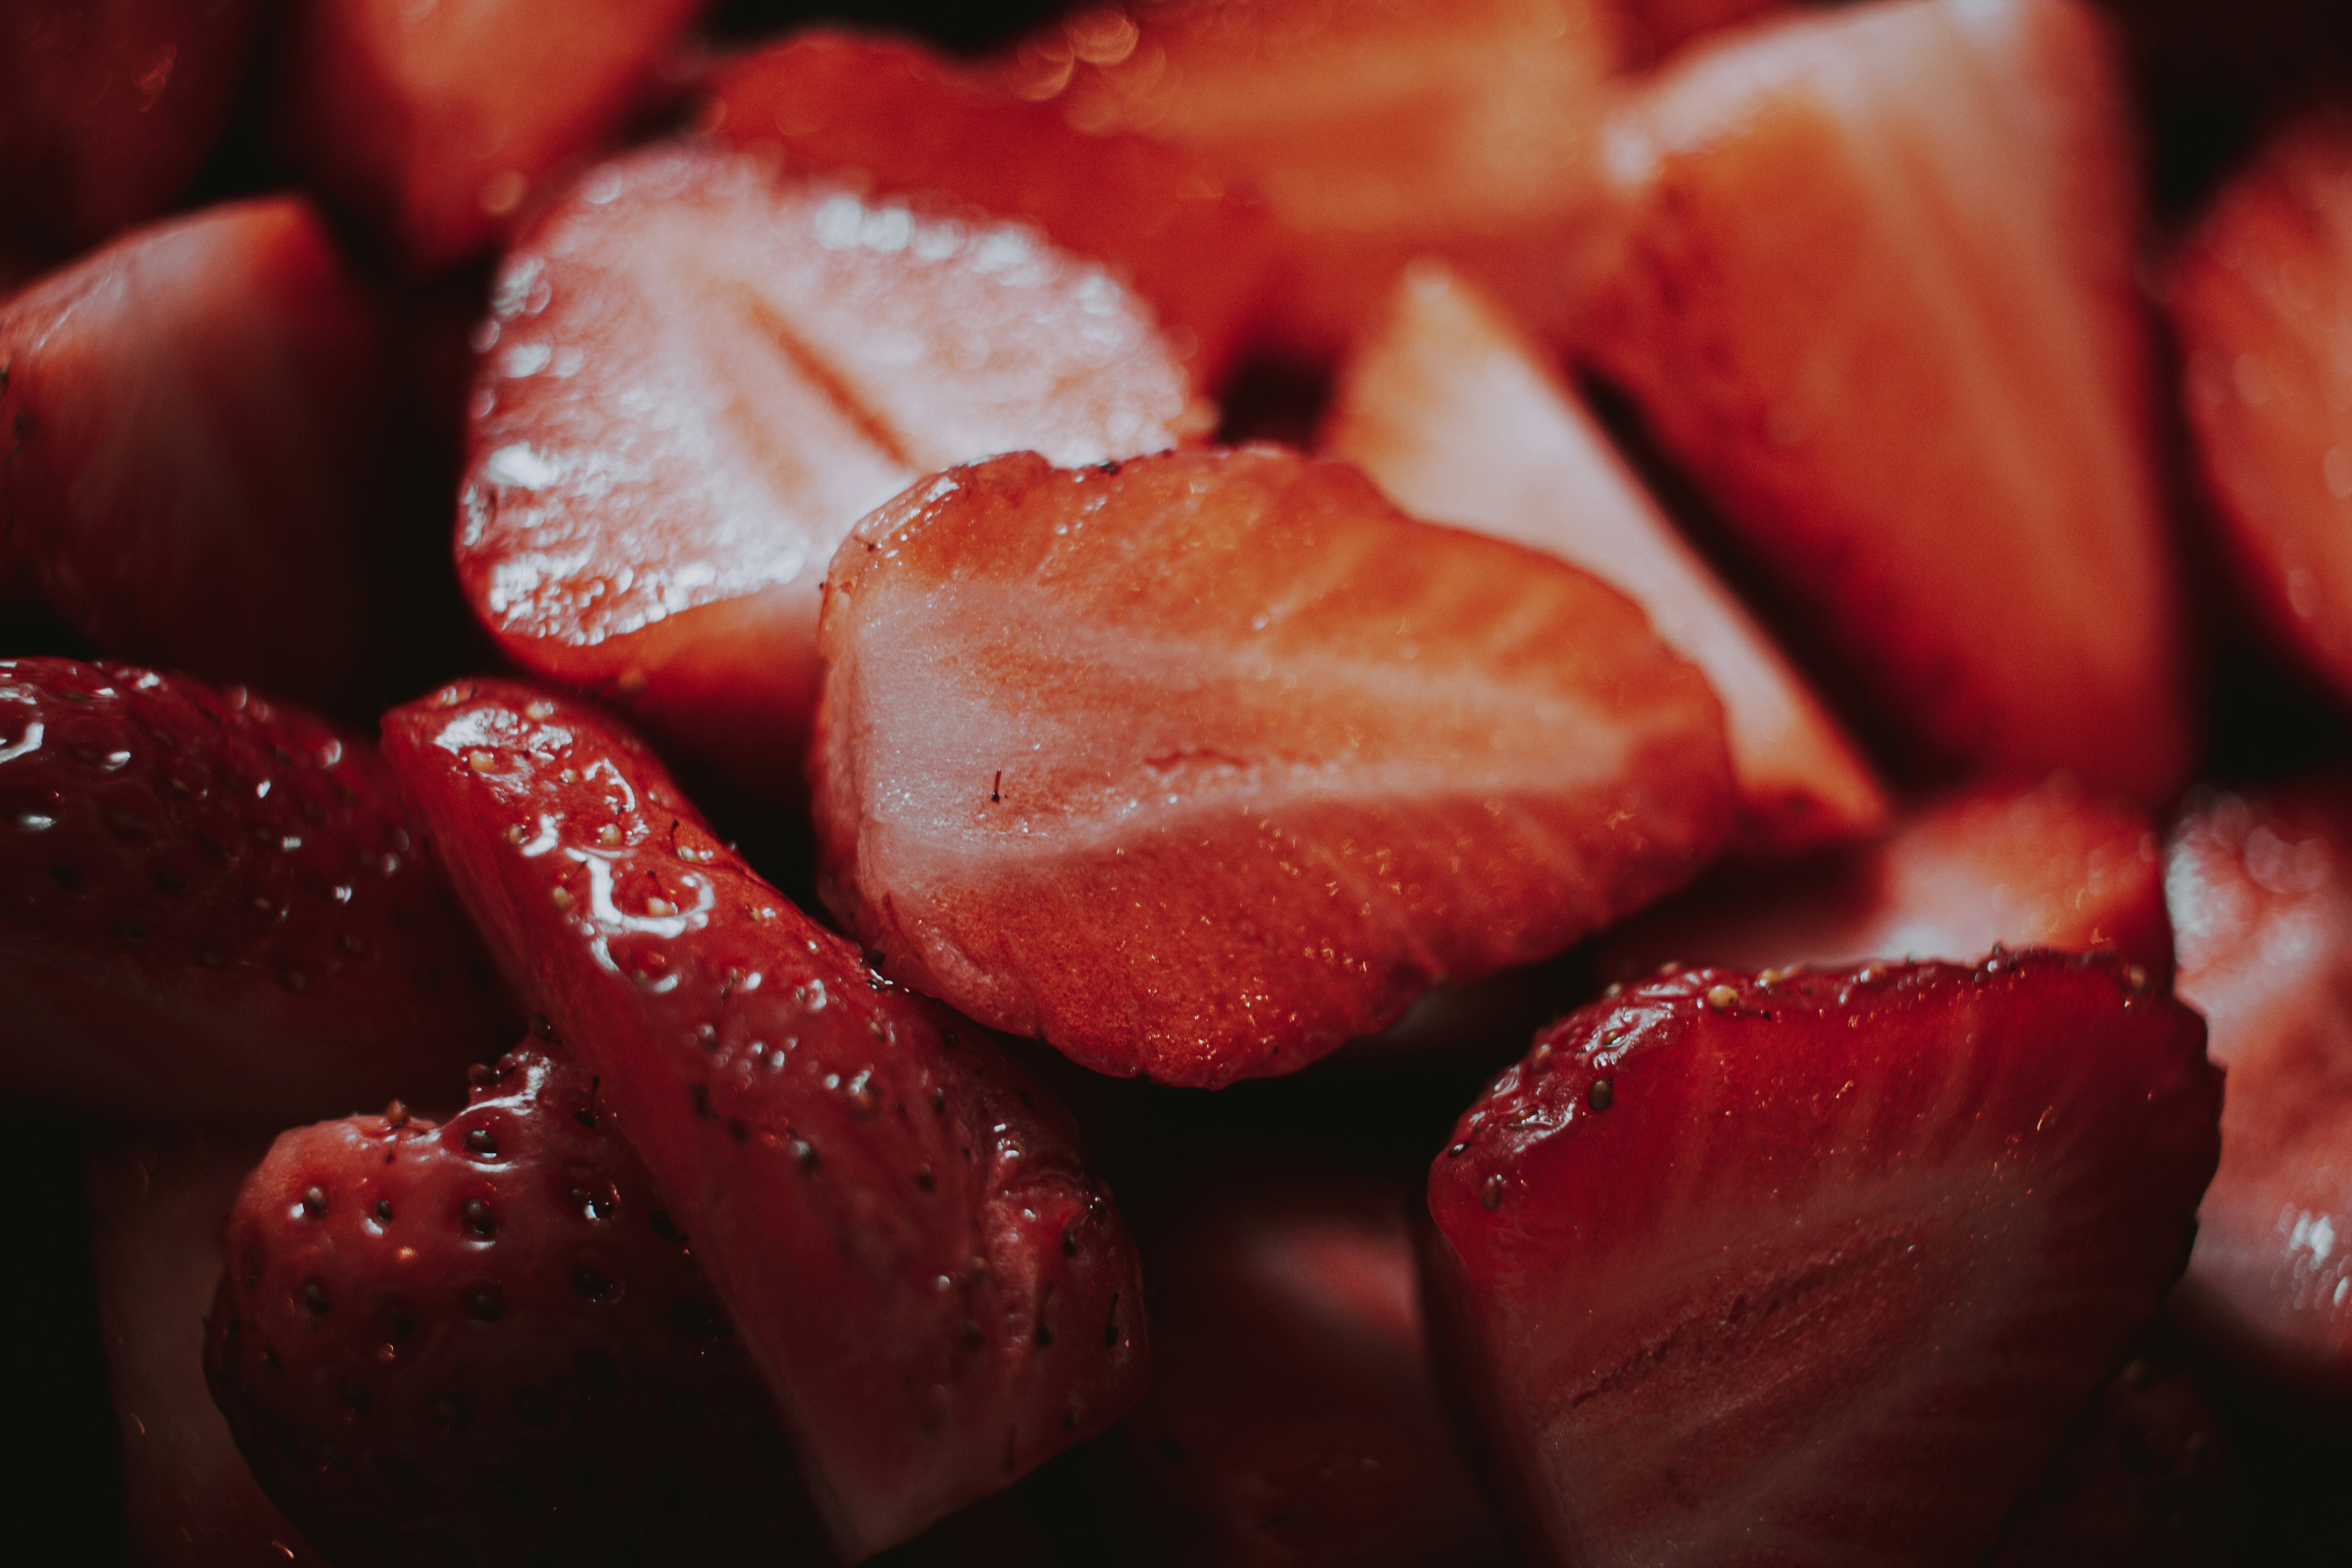 sliced strawberries in close up photography